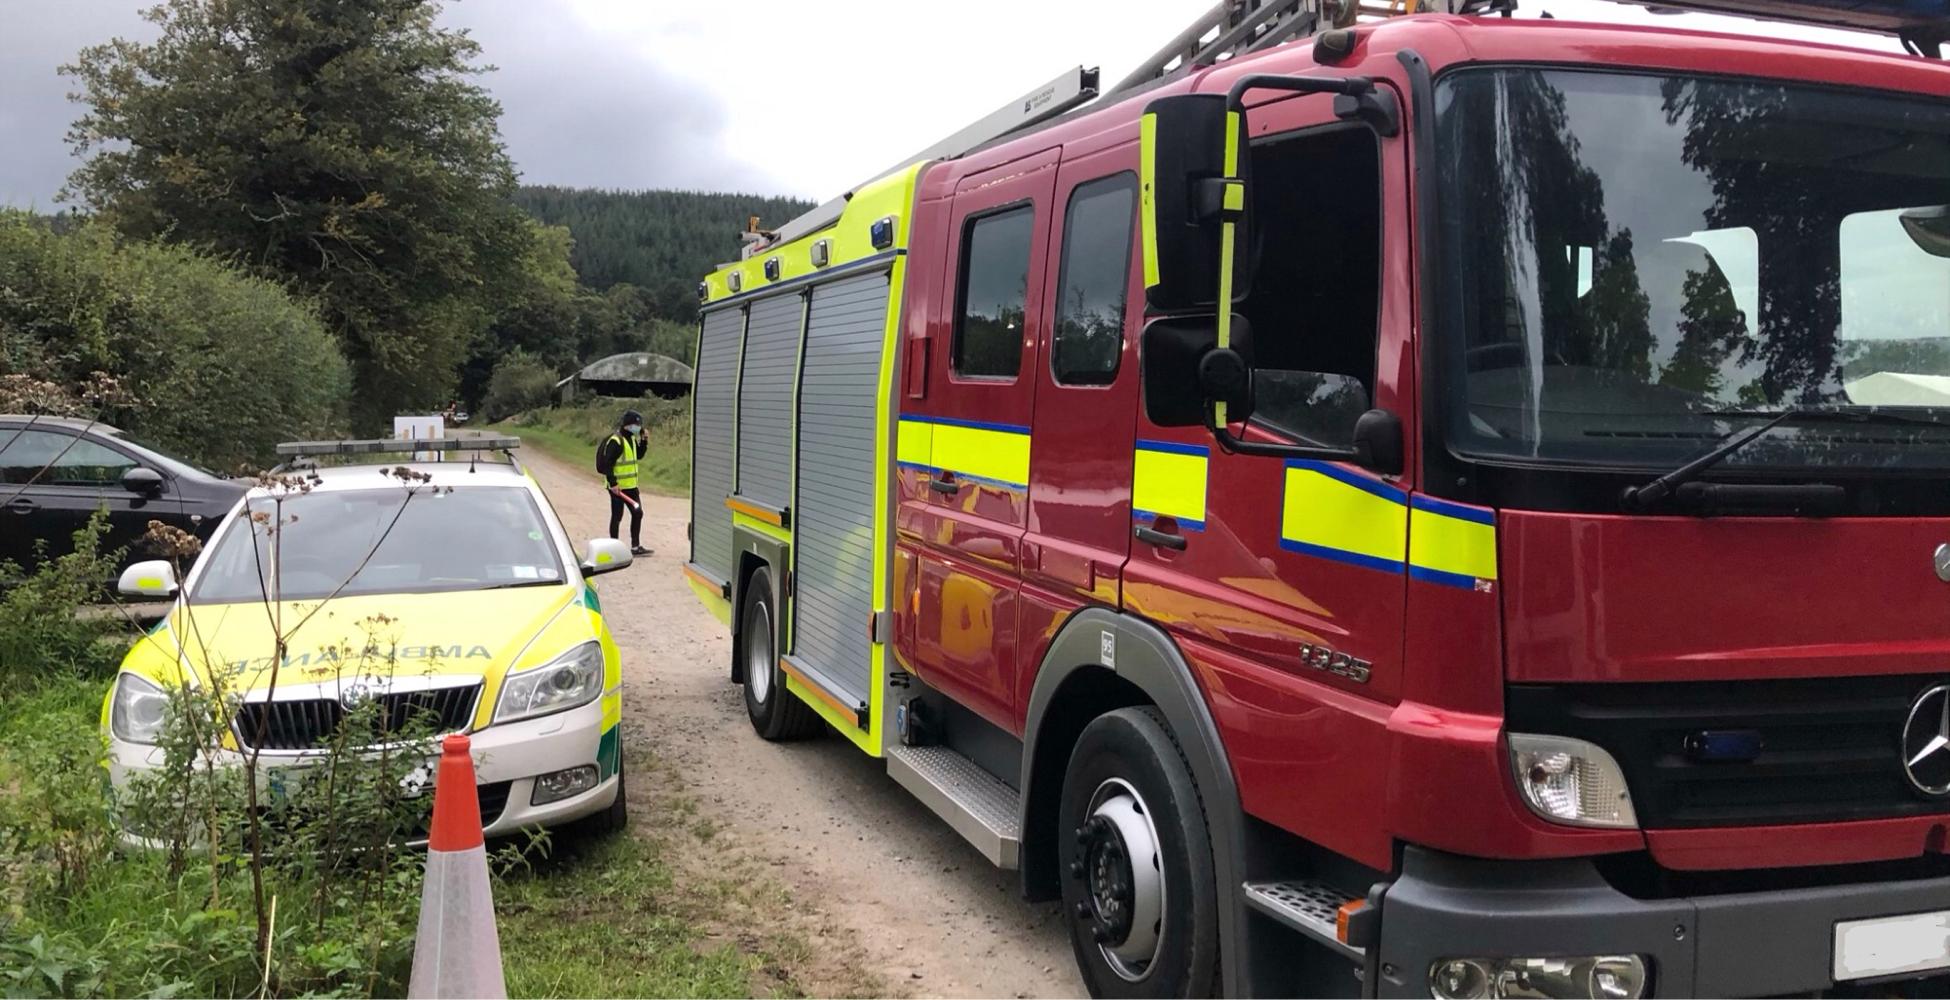 Fire engine and ambulance as supplied by Fire-Medics, Event Fire, Rescue & Emergency Medical Cover specialists, Belfast, Dublin, Donegal / Sligo providing an all Ireland service.